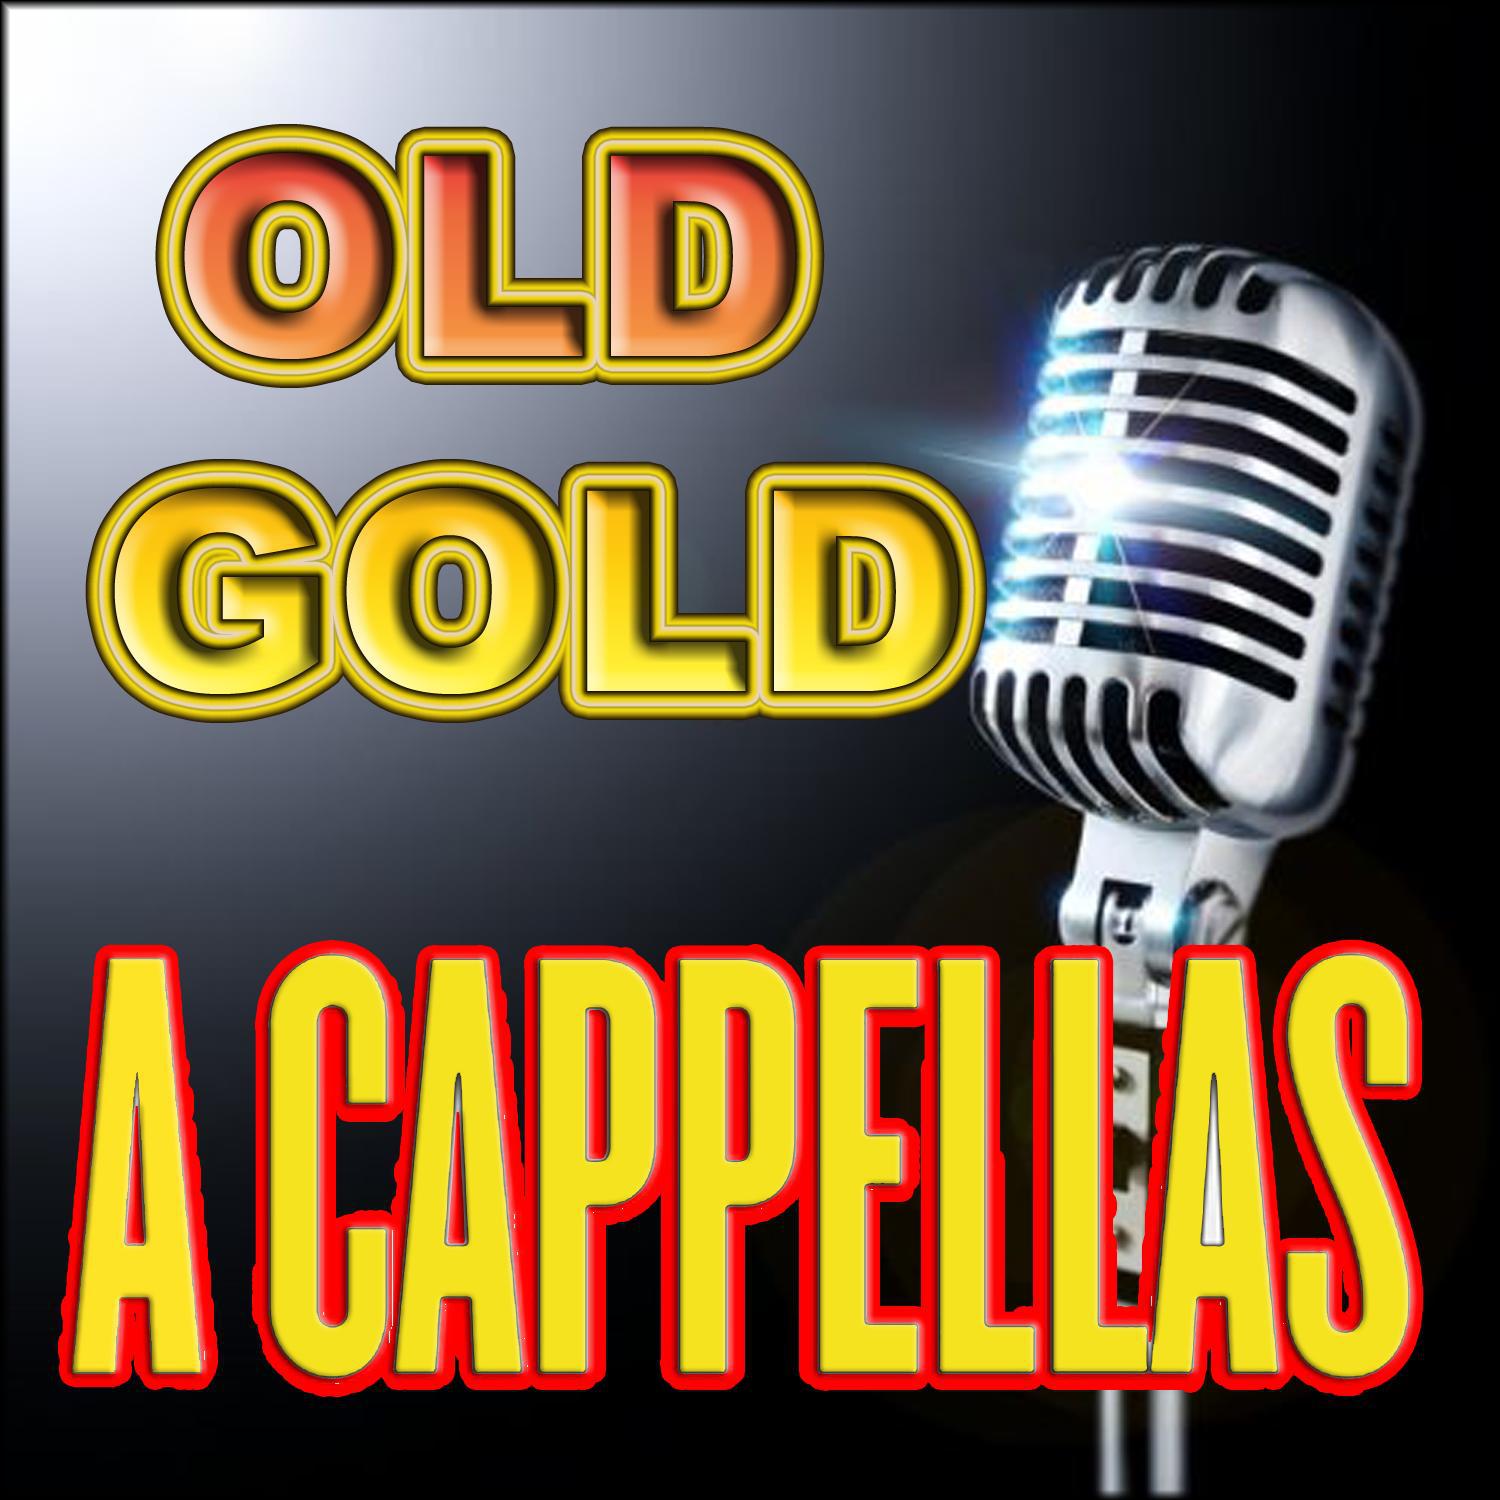 Old Gold Accapellas